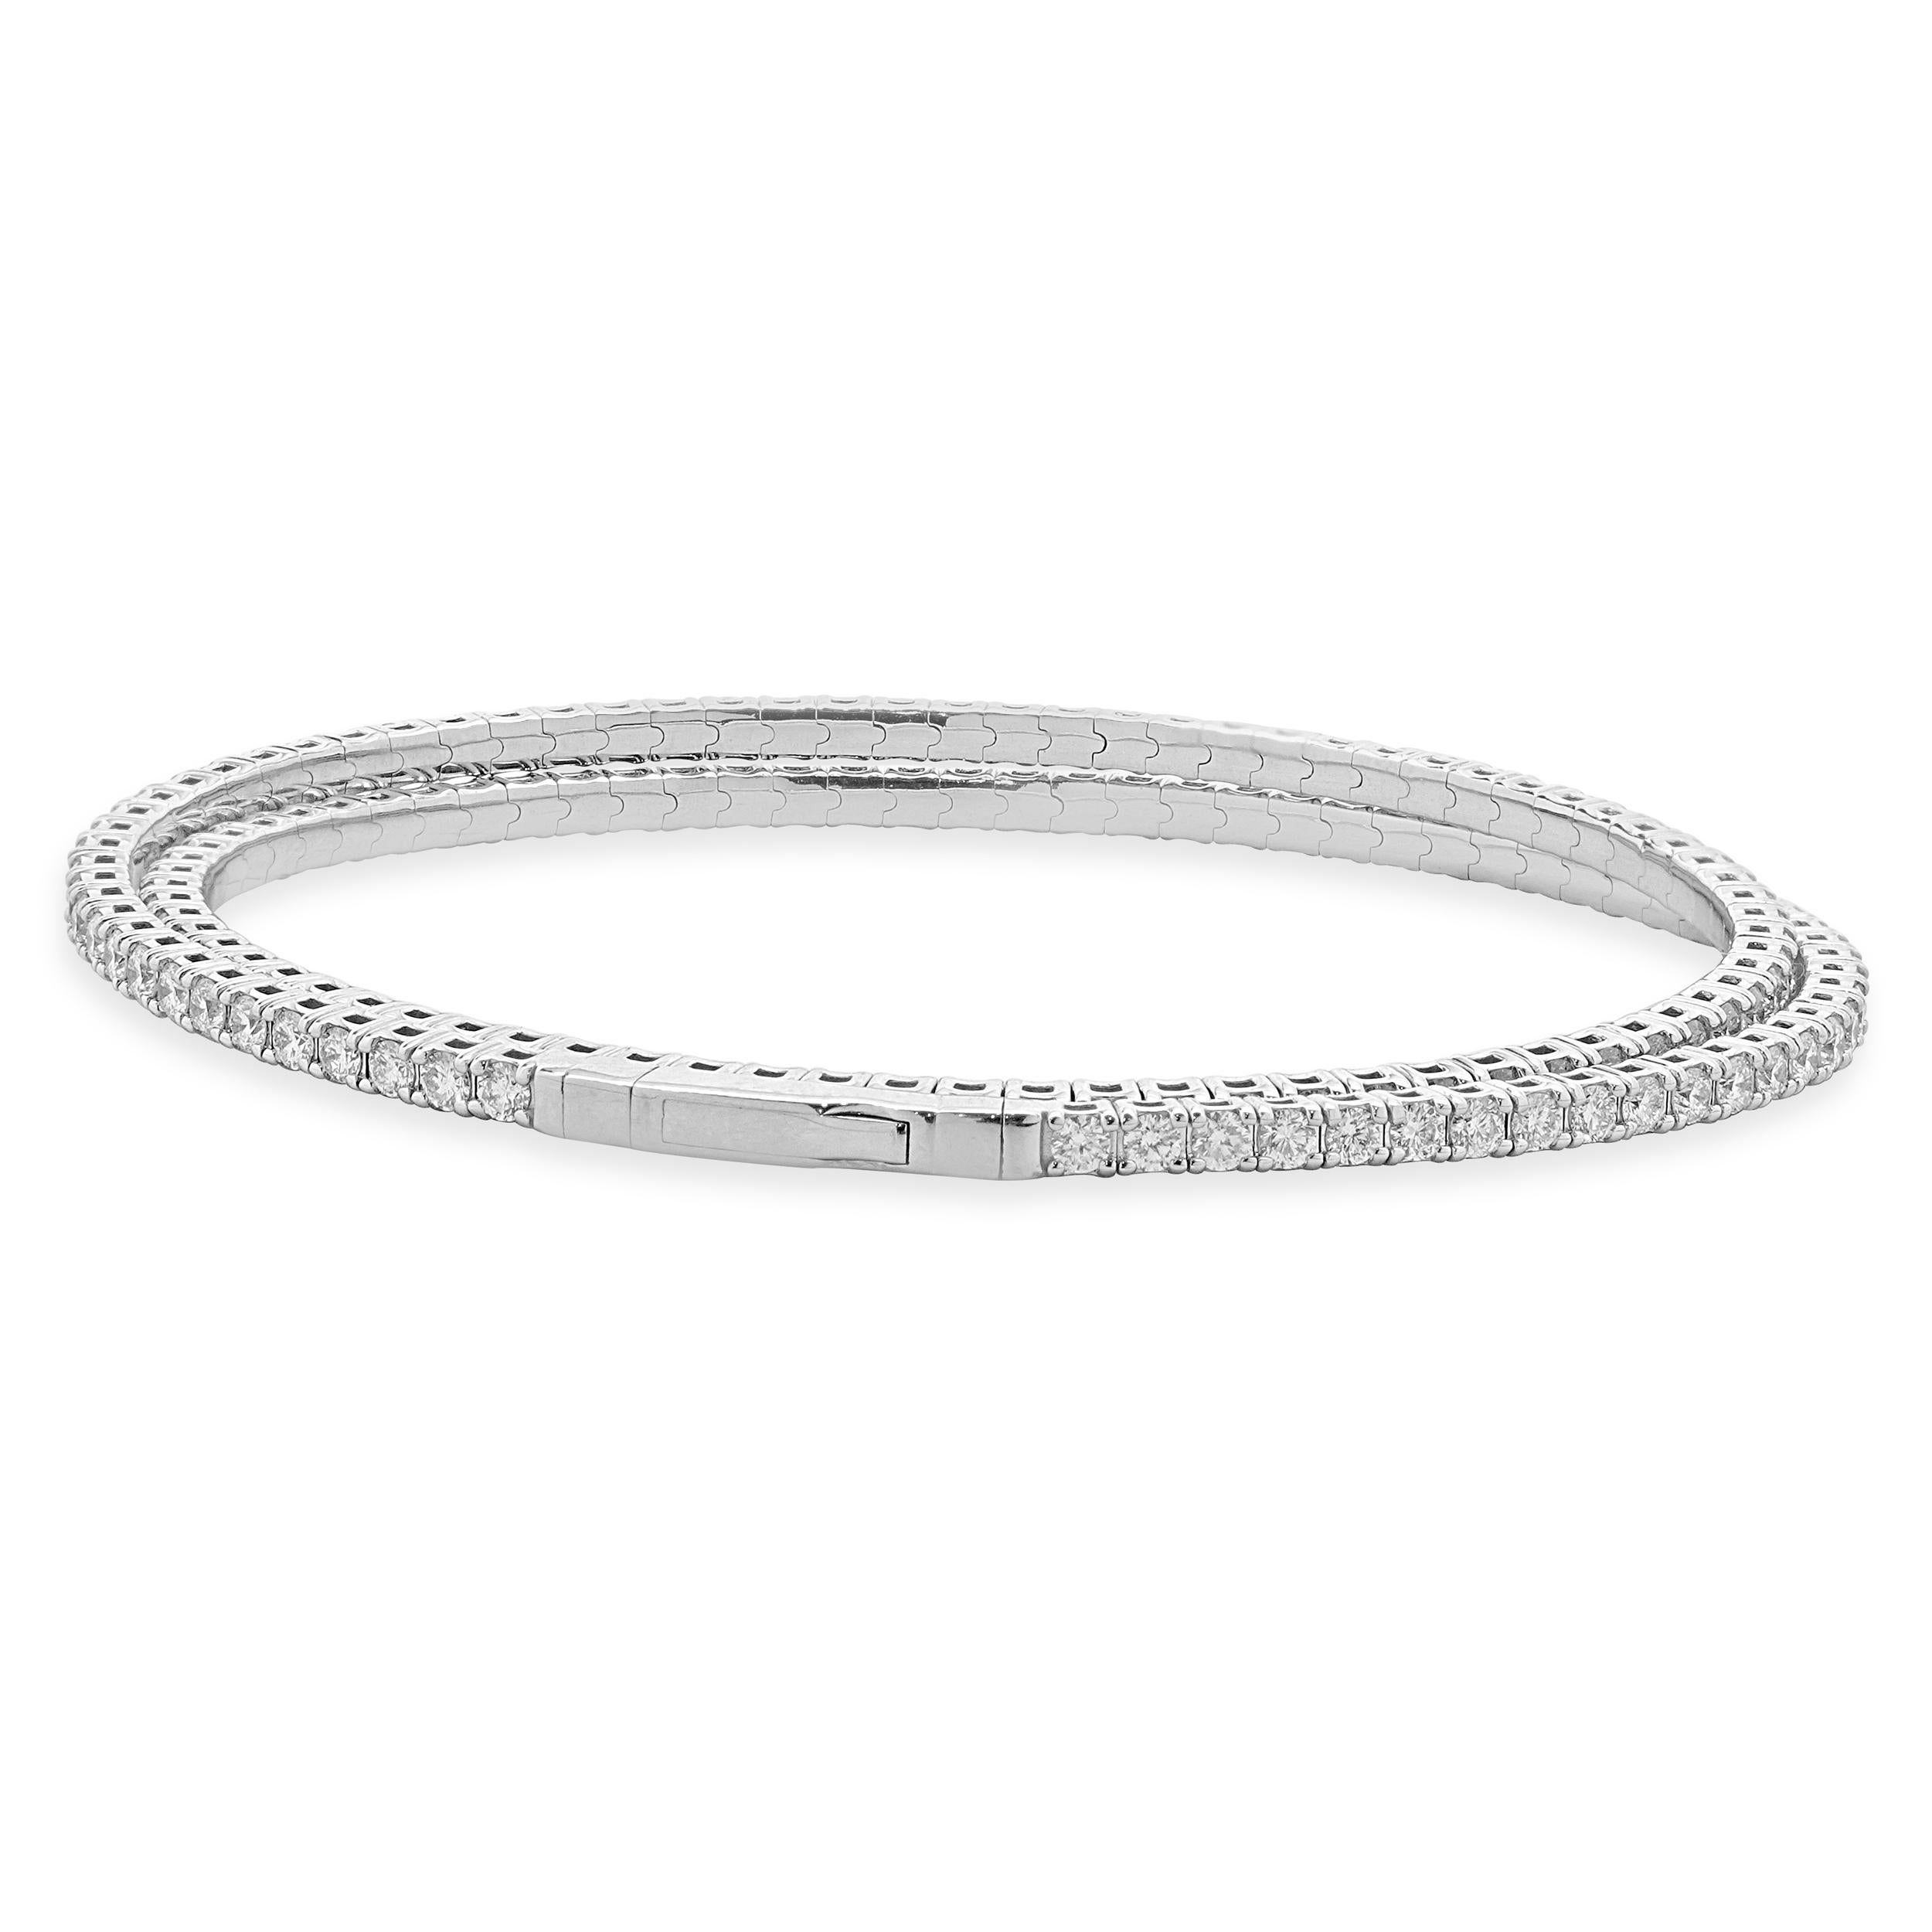 Designer: custom design
Material: 14k white Gold
Diamond: round brilliant cut= 5.30cttw
Color: G
Clarity: VS-SI1
Dimensions: bracelet will fit up to a 7-inch wrist
Weight: 15.70 grams
